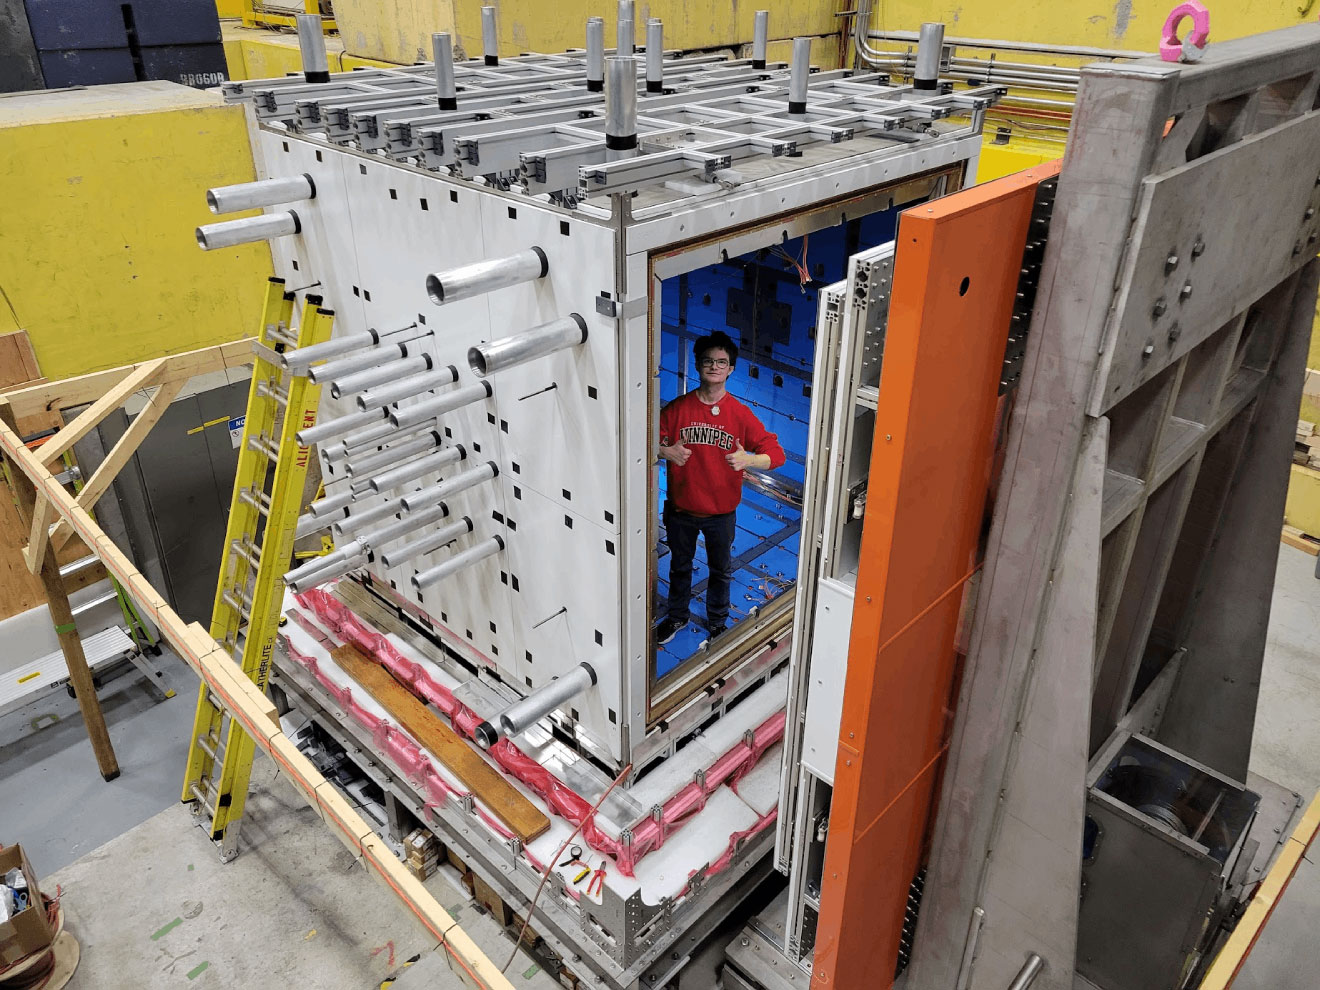 Person in a red shirt and dark pants standing in a large metal box inside a large room. The box has metal pipes coming out of the sides and top.